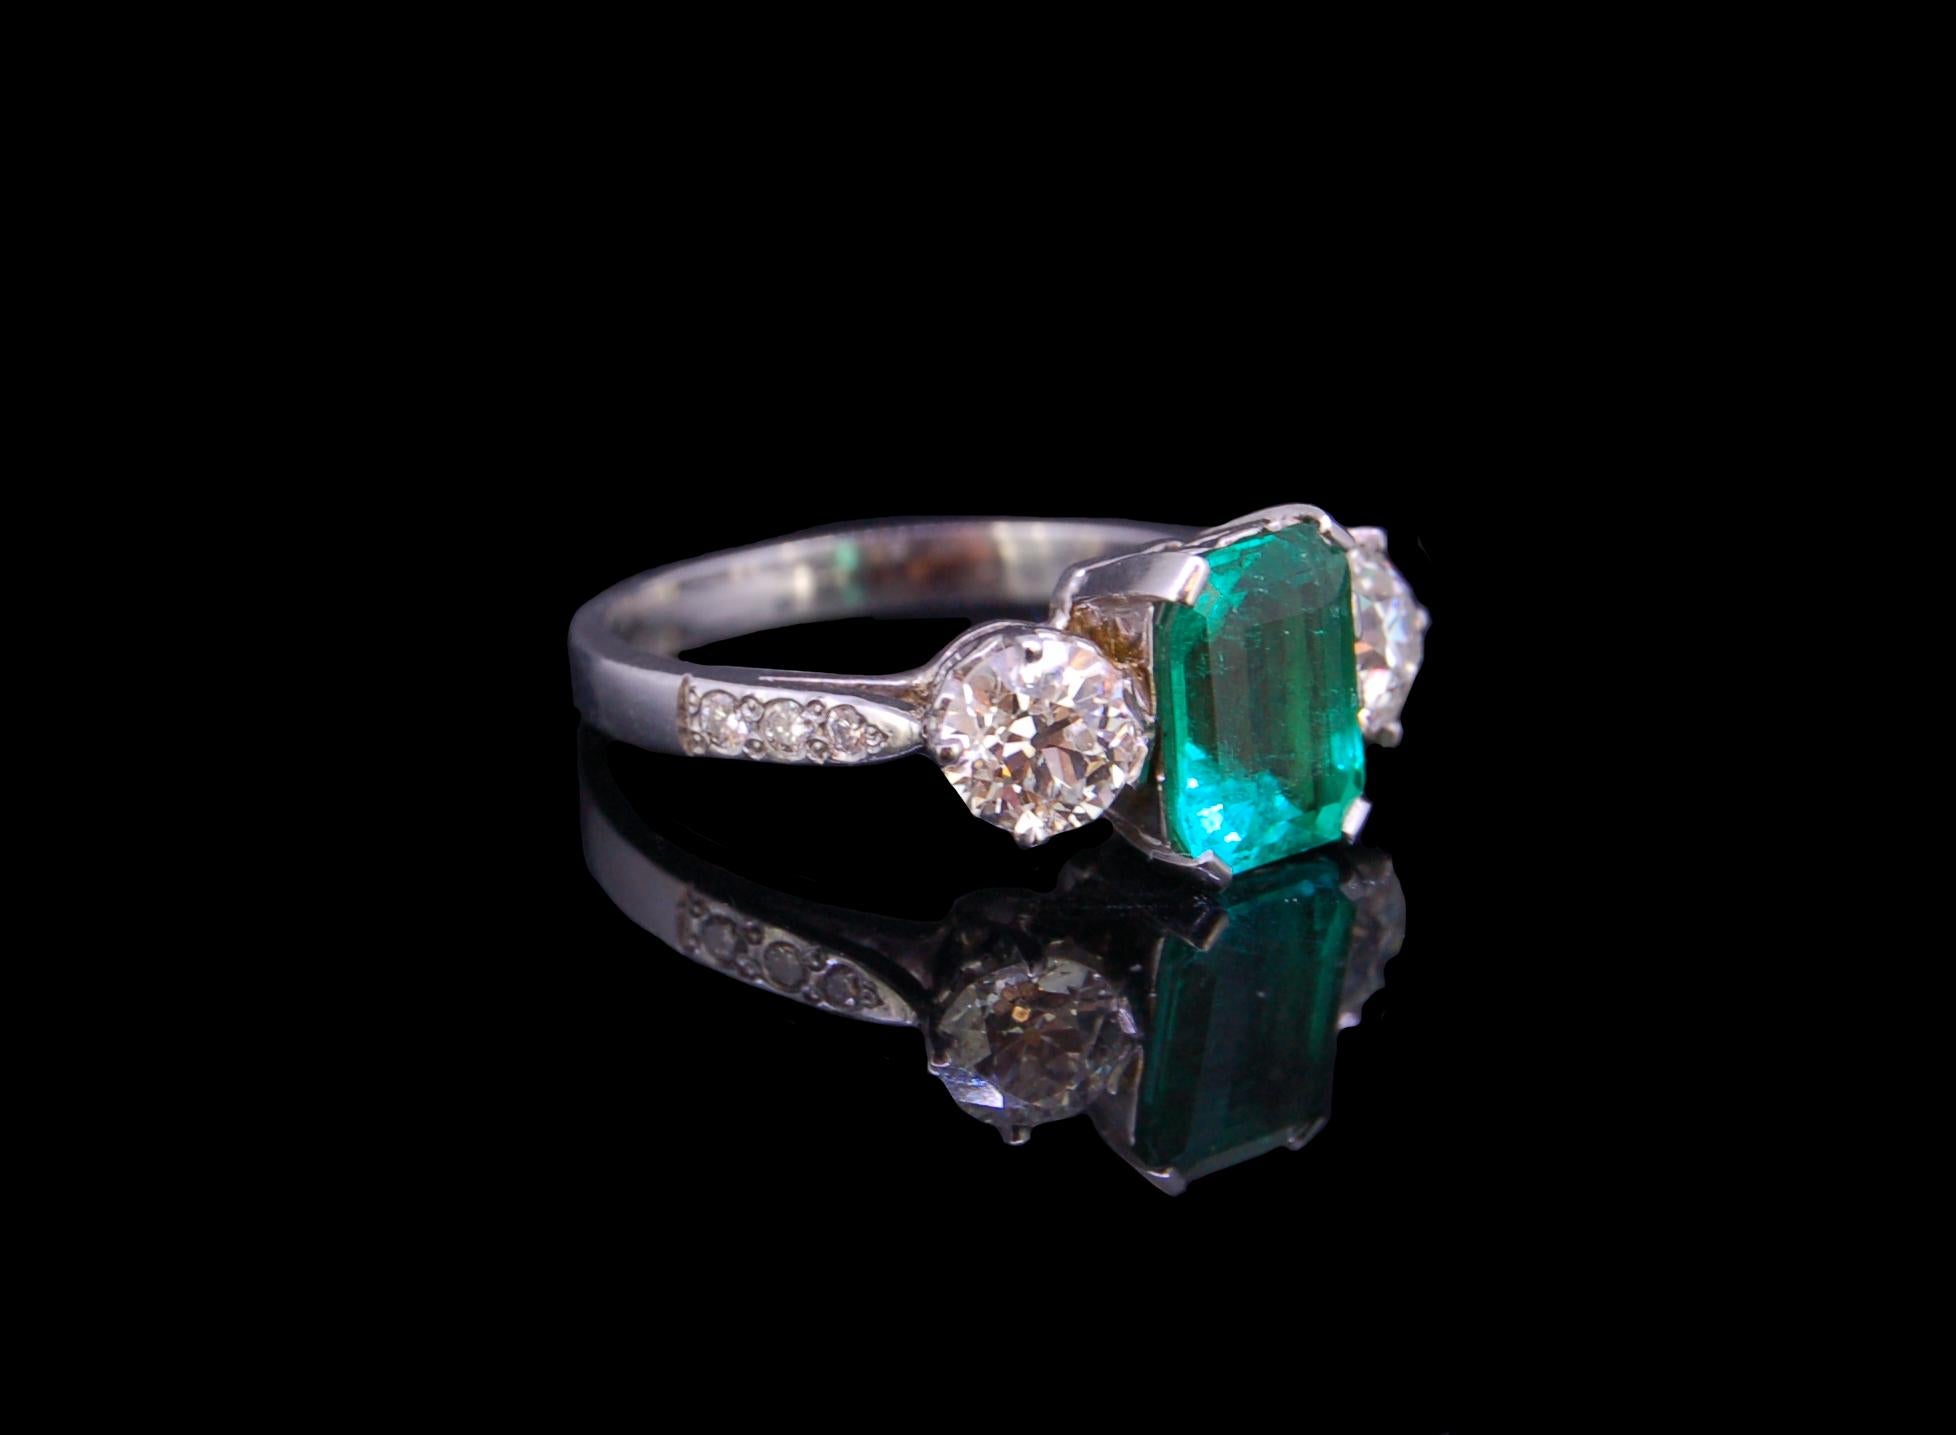 2.01 ct. COLOMBIAN EMERALD AND DIAMOND 3-STONE RING, set with a central octagonal emerald of 2.01 ct. flanked by diamonds on the shoulders totalling 1.14 ct. Size O. 3.9 grams. Accompanied by GCS London report No. 80249-20 stating that the 2.01 ct.